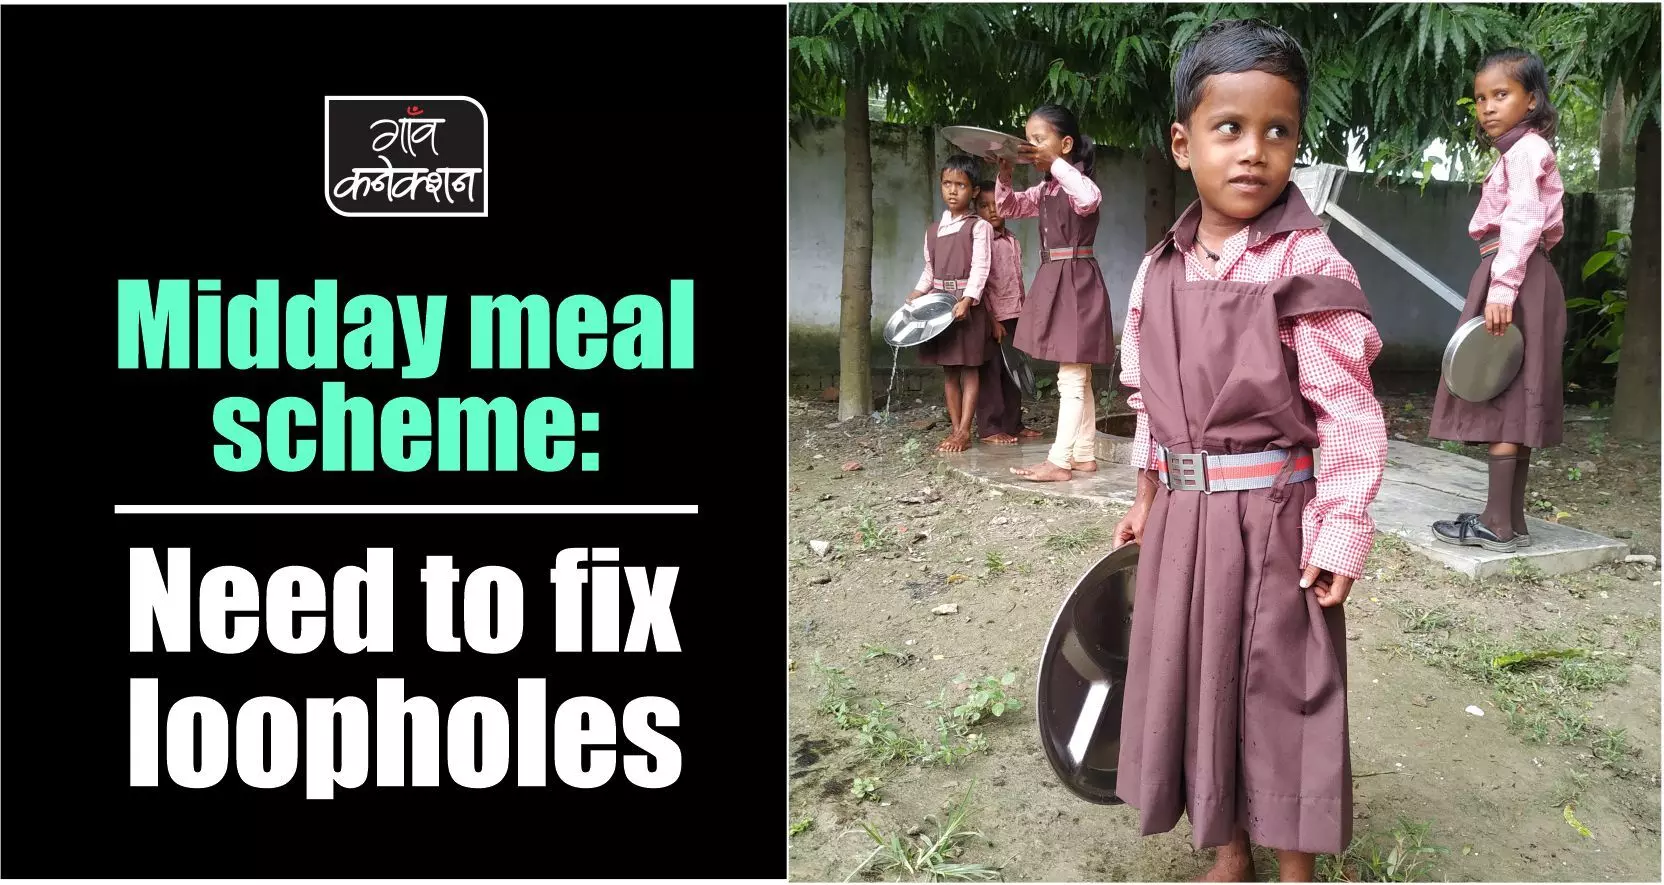 Scams in midday meals hard to execute. Just need to fix the loopholes, say gram pradhans, headmasters